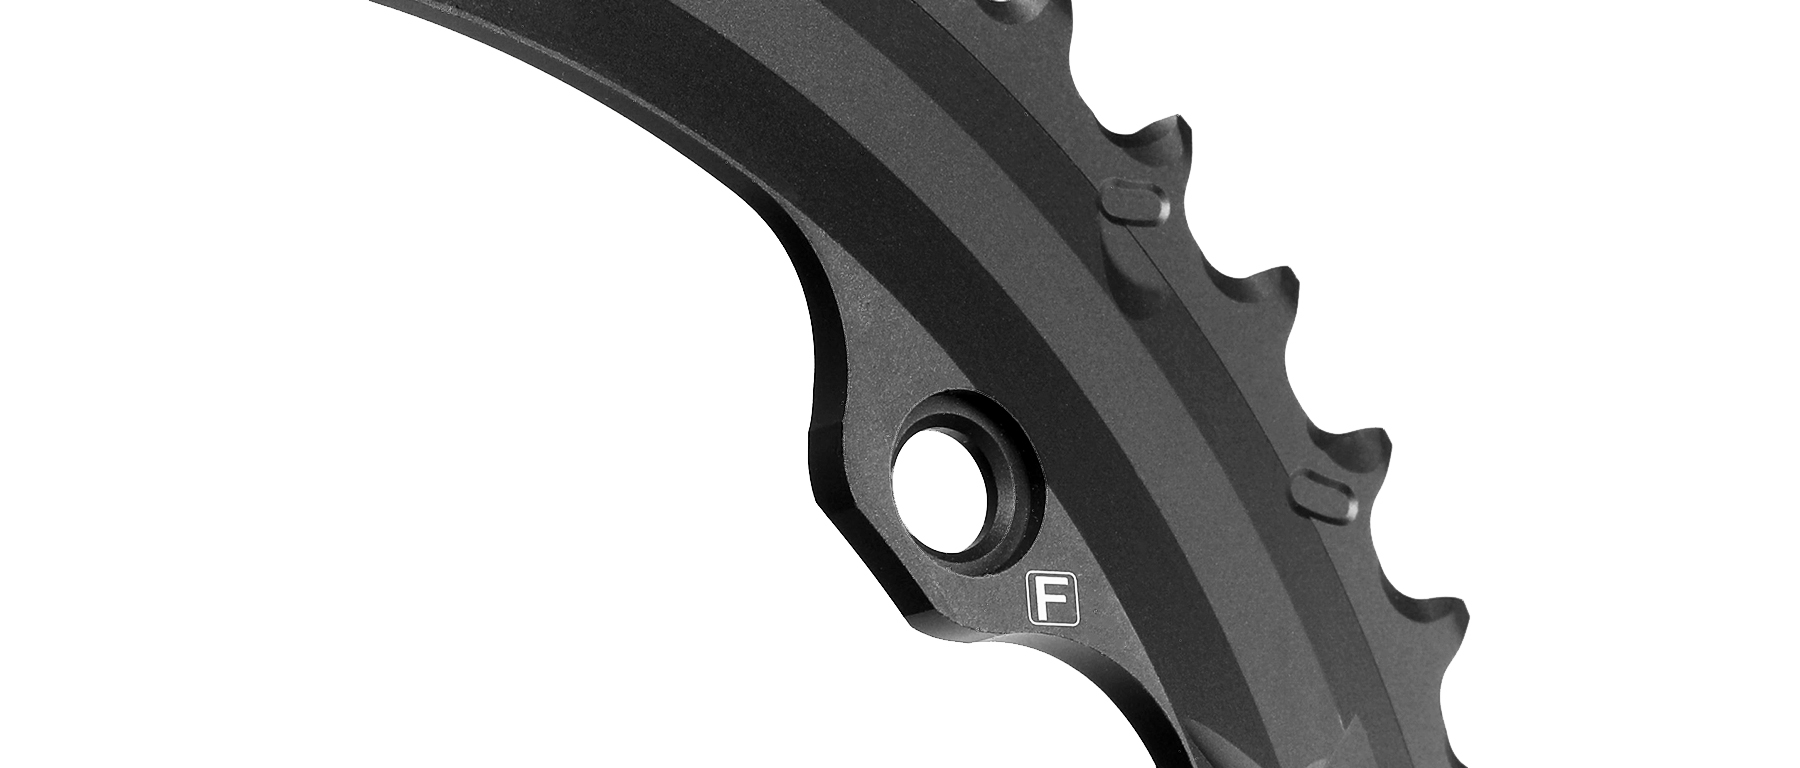 Campagnolo Super Record 12-Speed Outer Chainring